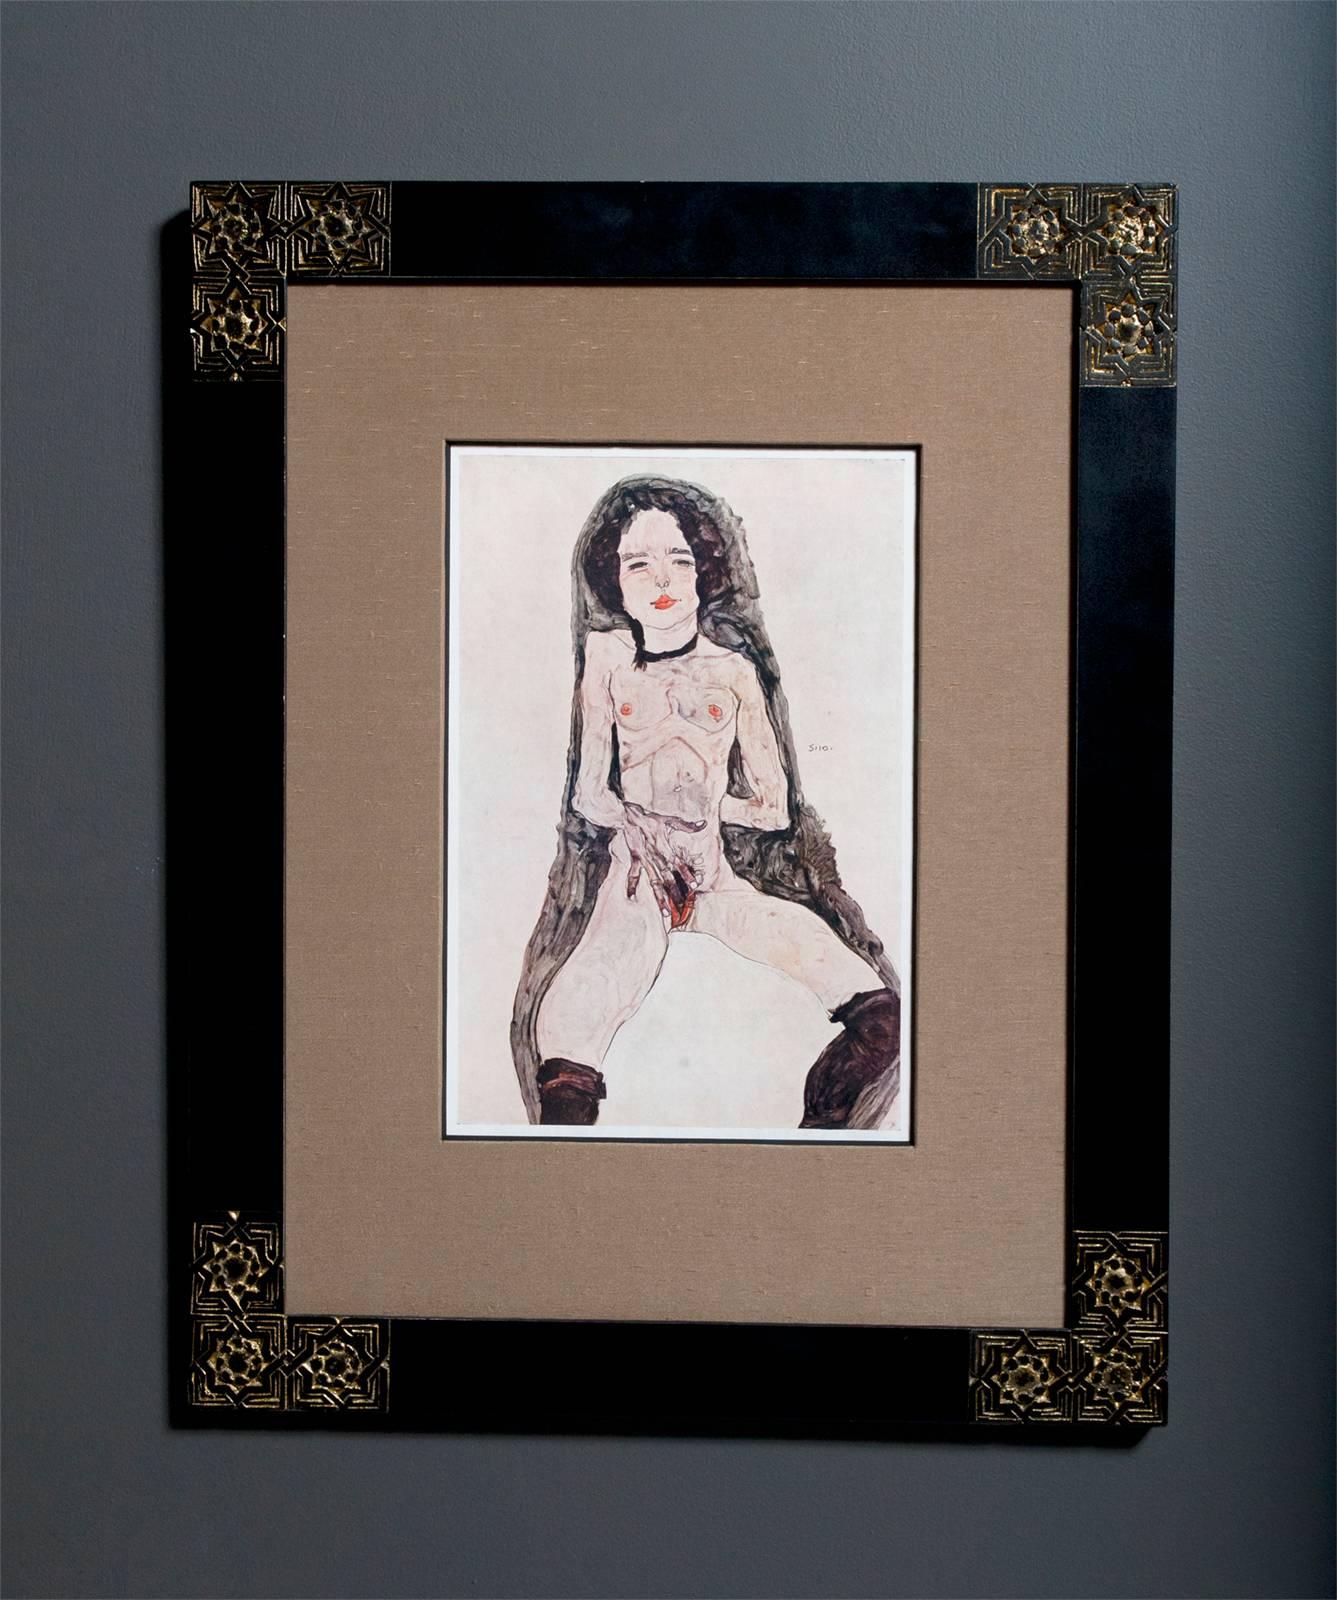 Masturbating Woman Surrounded by Black - Print by (after) Egon Schiele